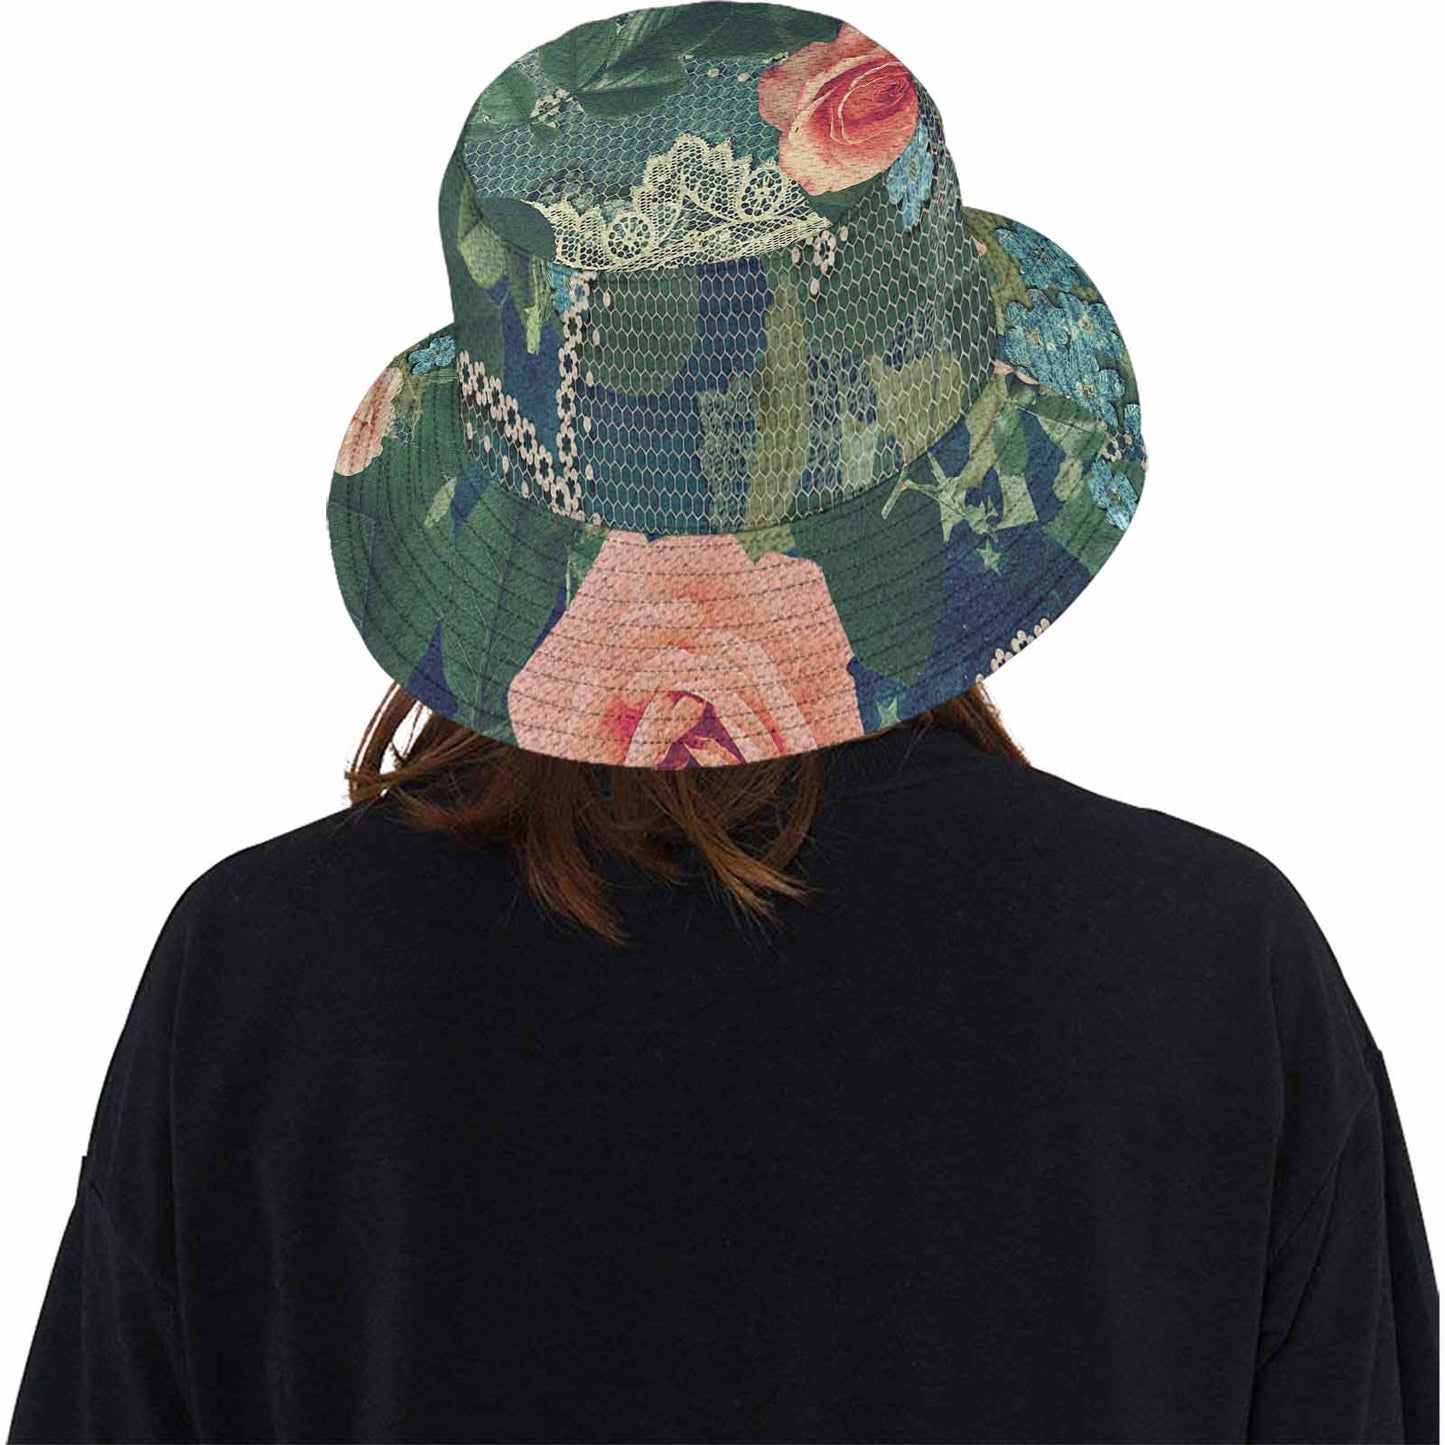 Victorian lace Bucket Hat, outdoors hat, design 01